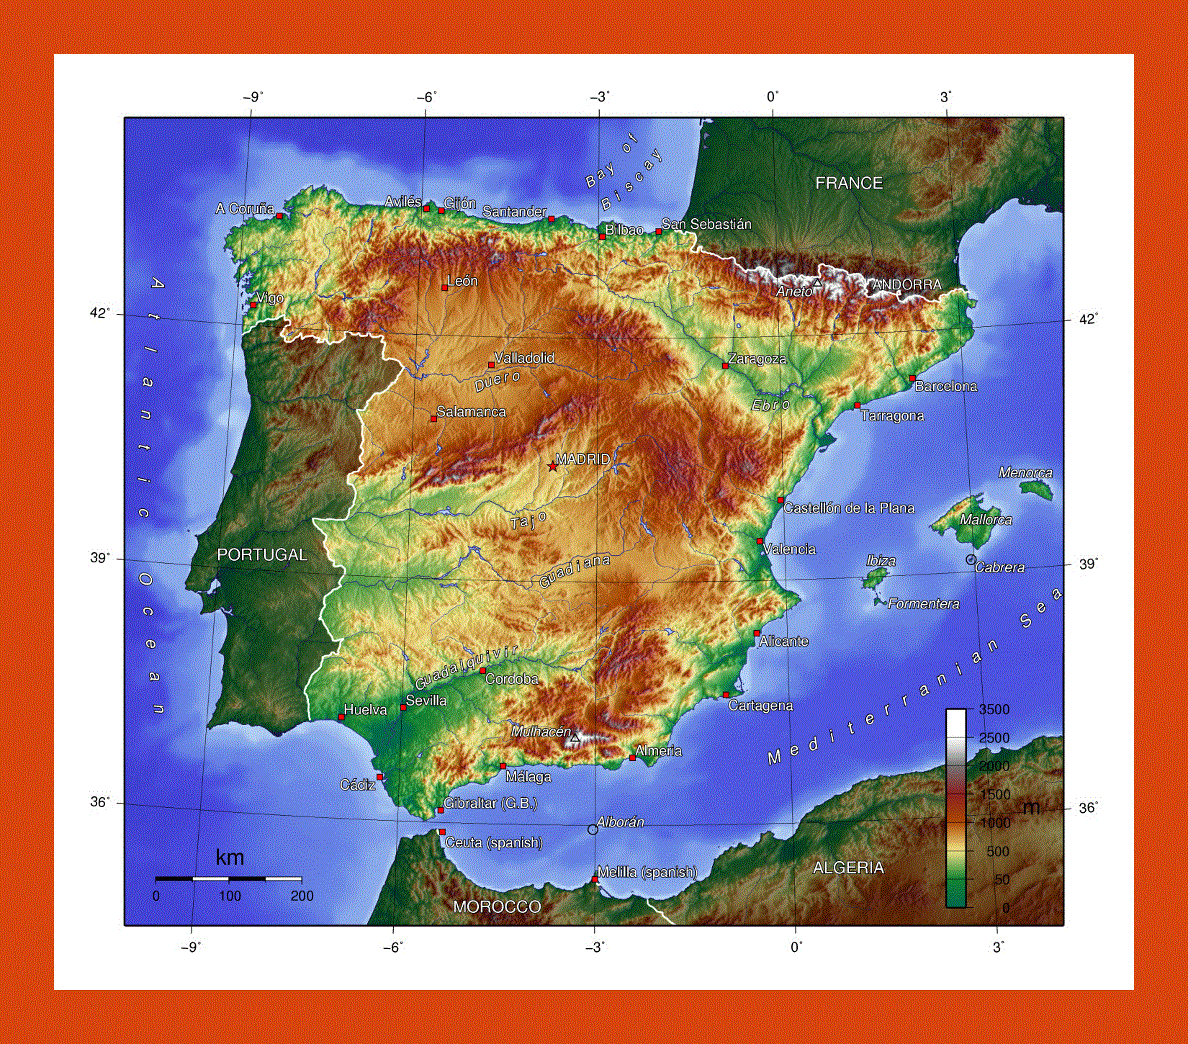 Topographical map of Spain